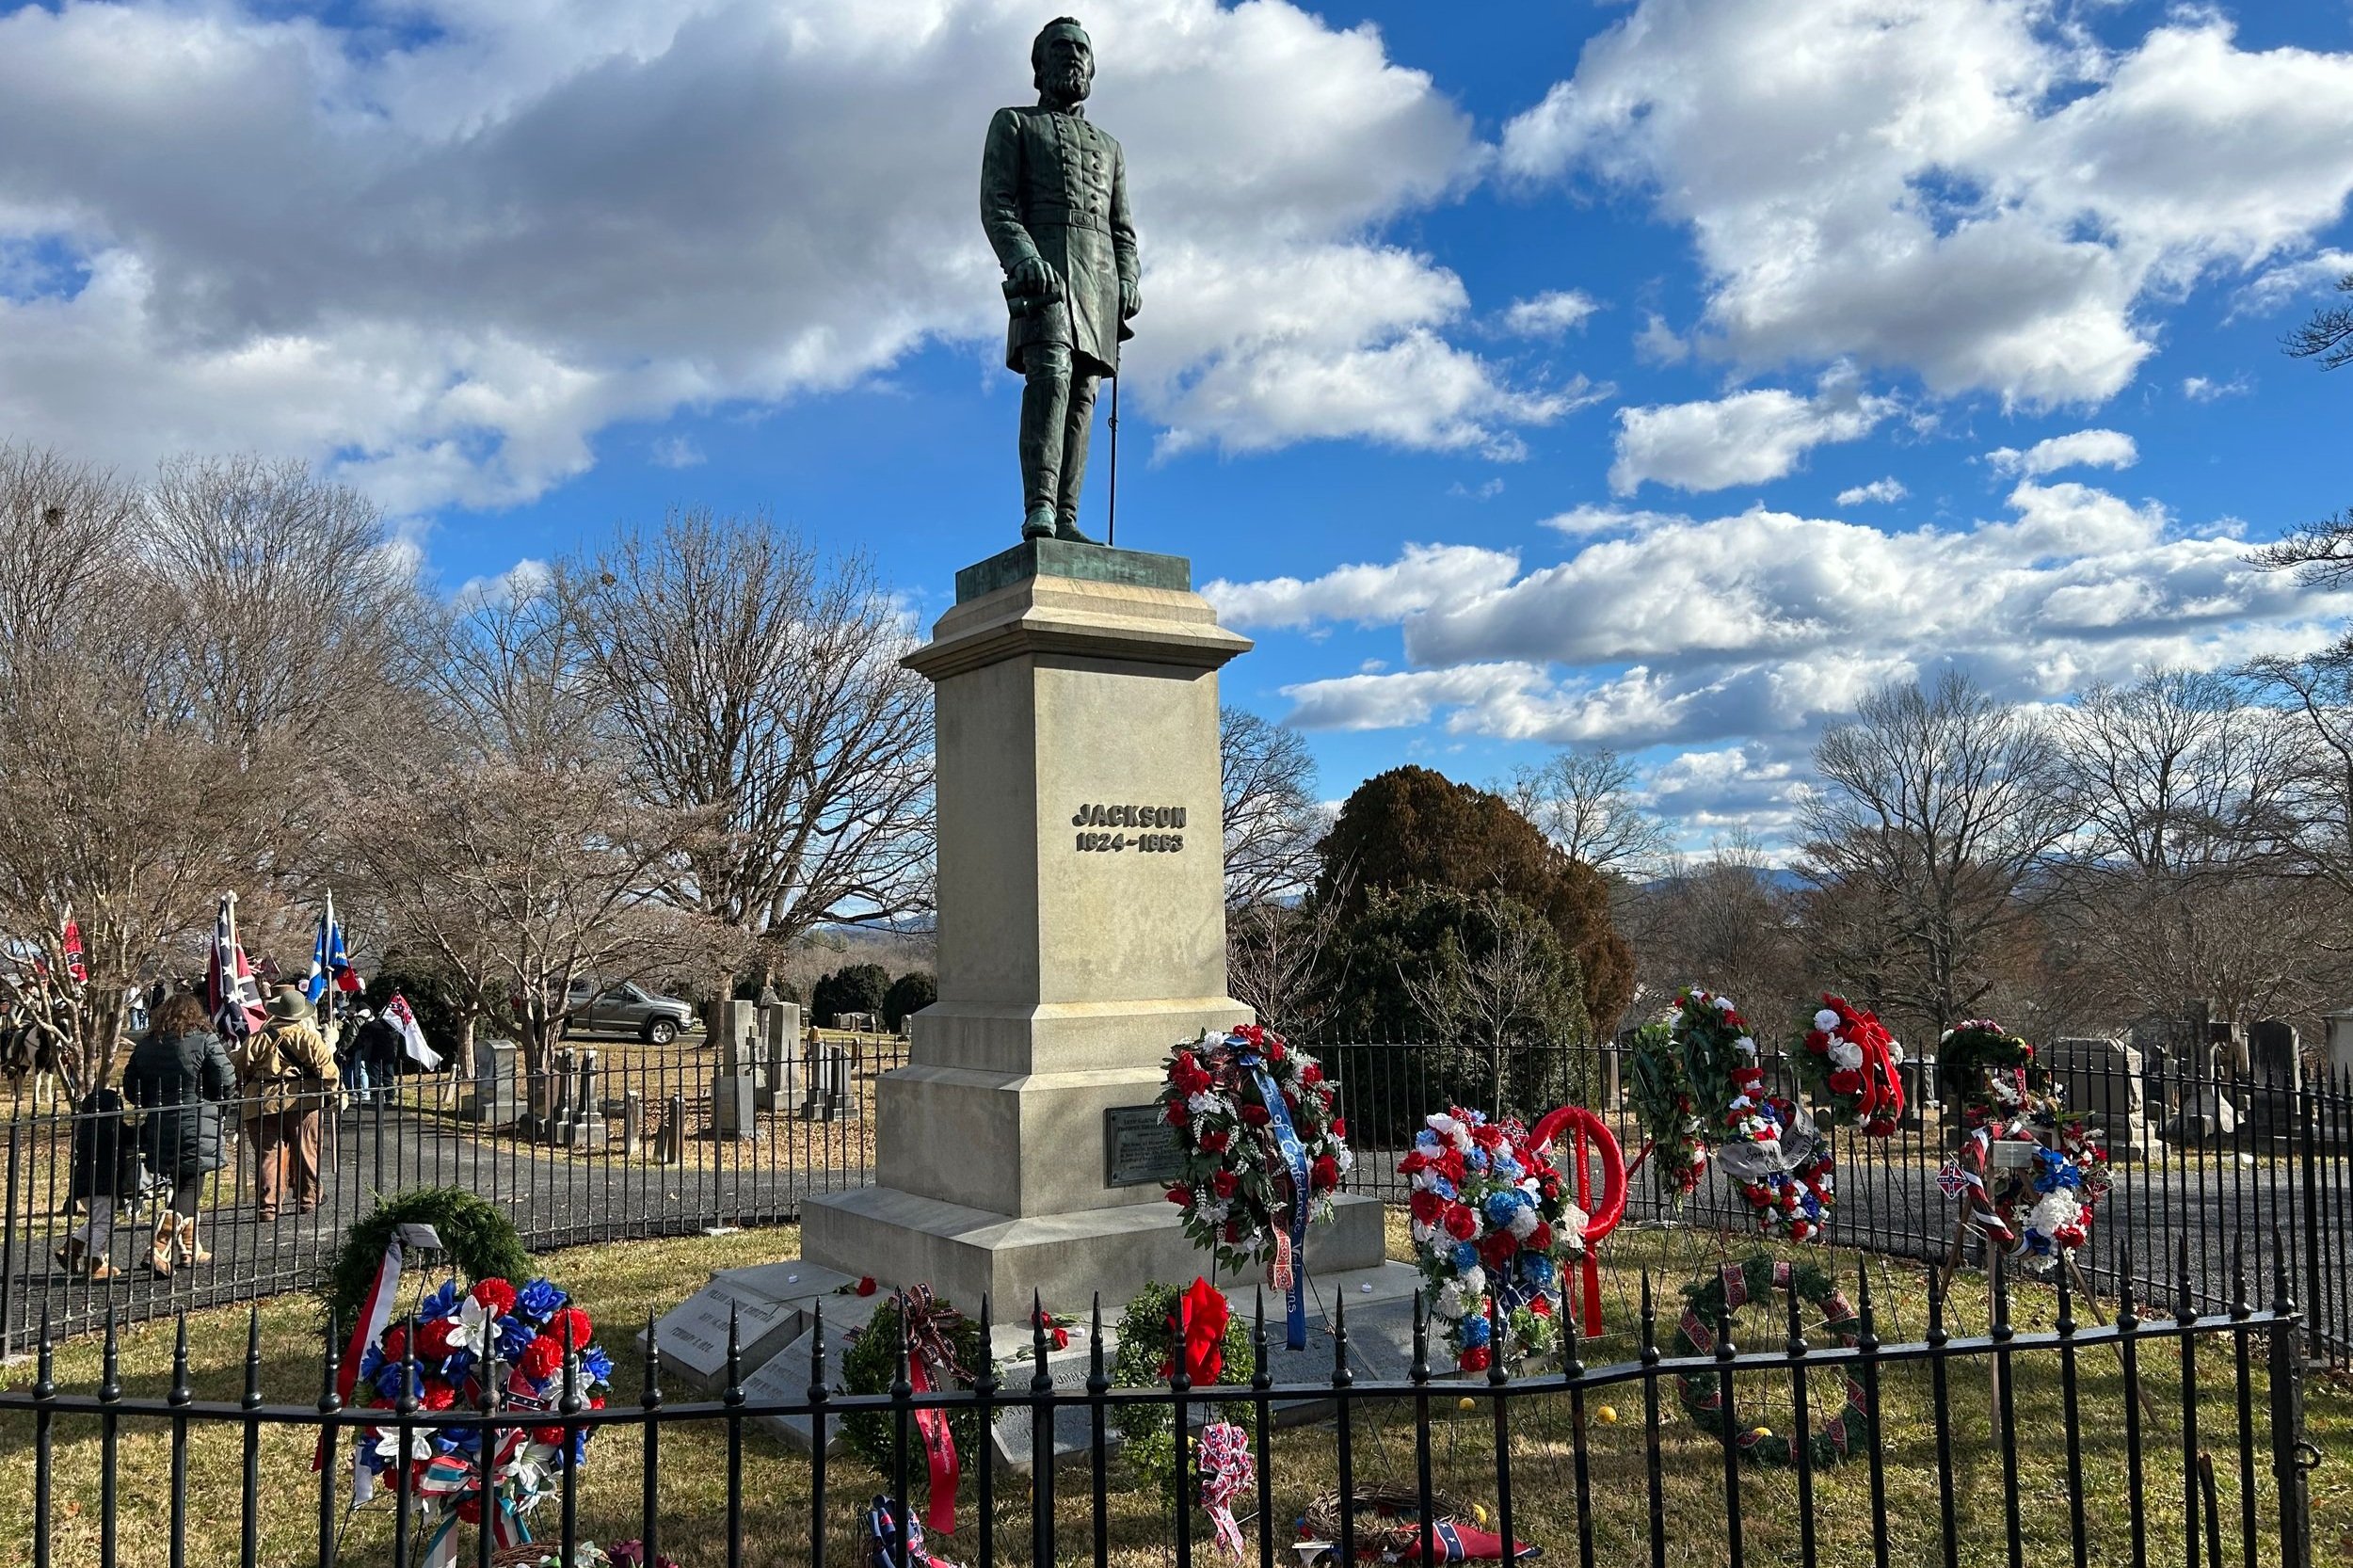  Wreaths placed on Thomas “Stonewall” Jackson’s grave on Saturday, January 13. Source:  The Spectator.  